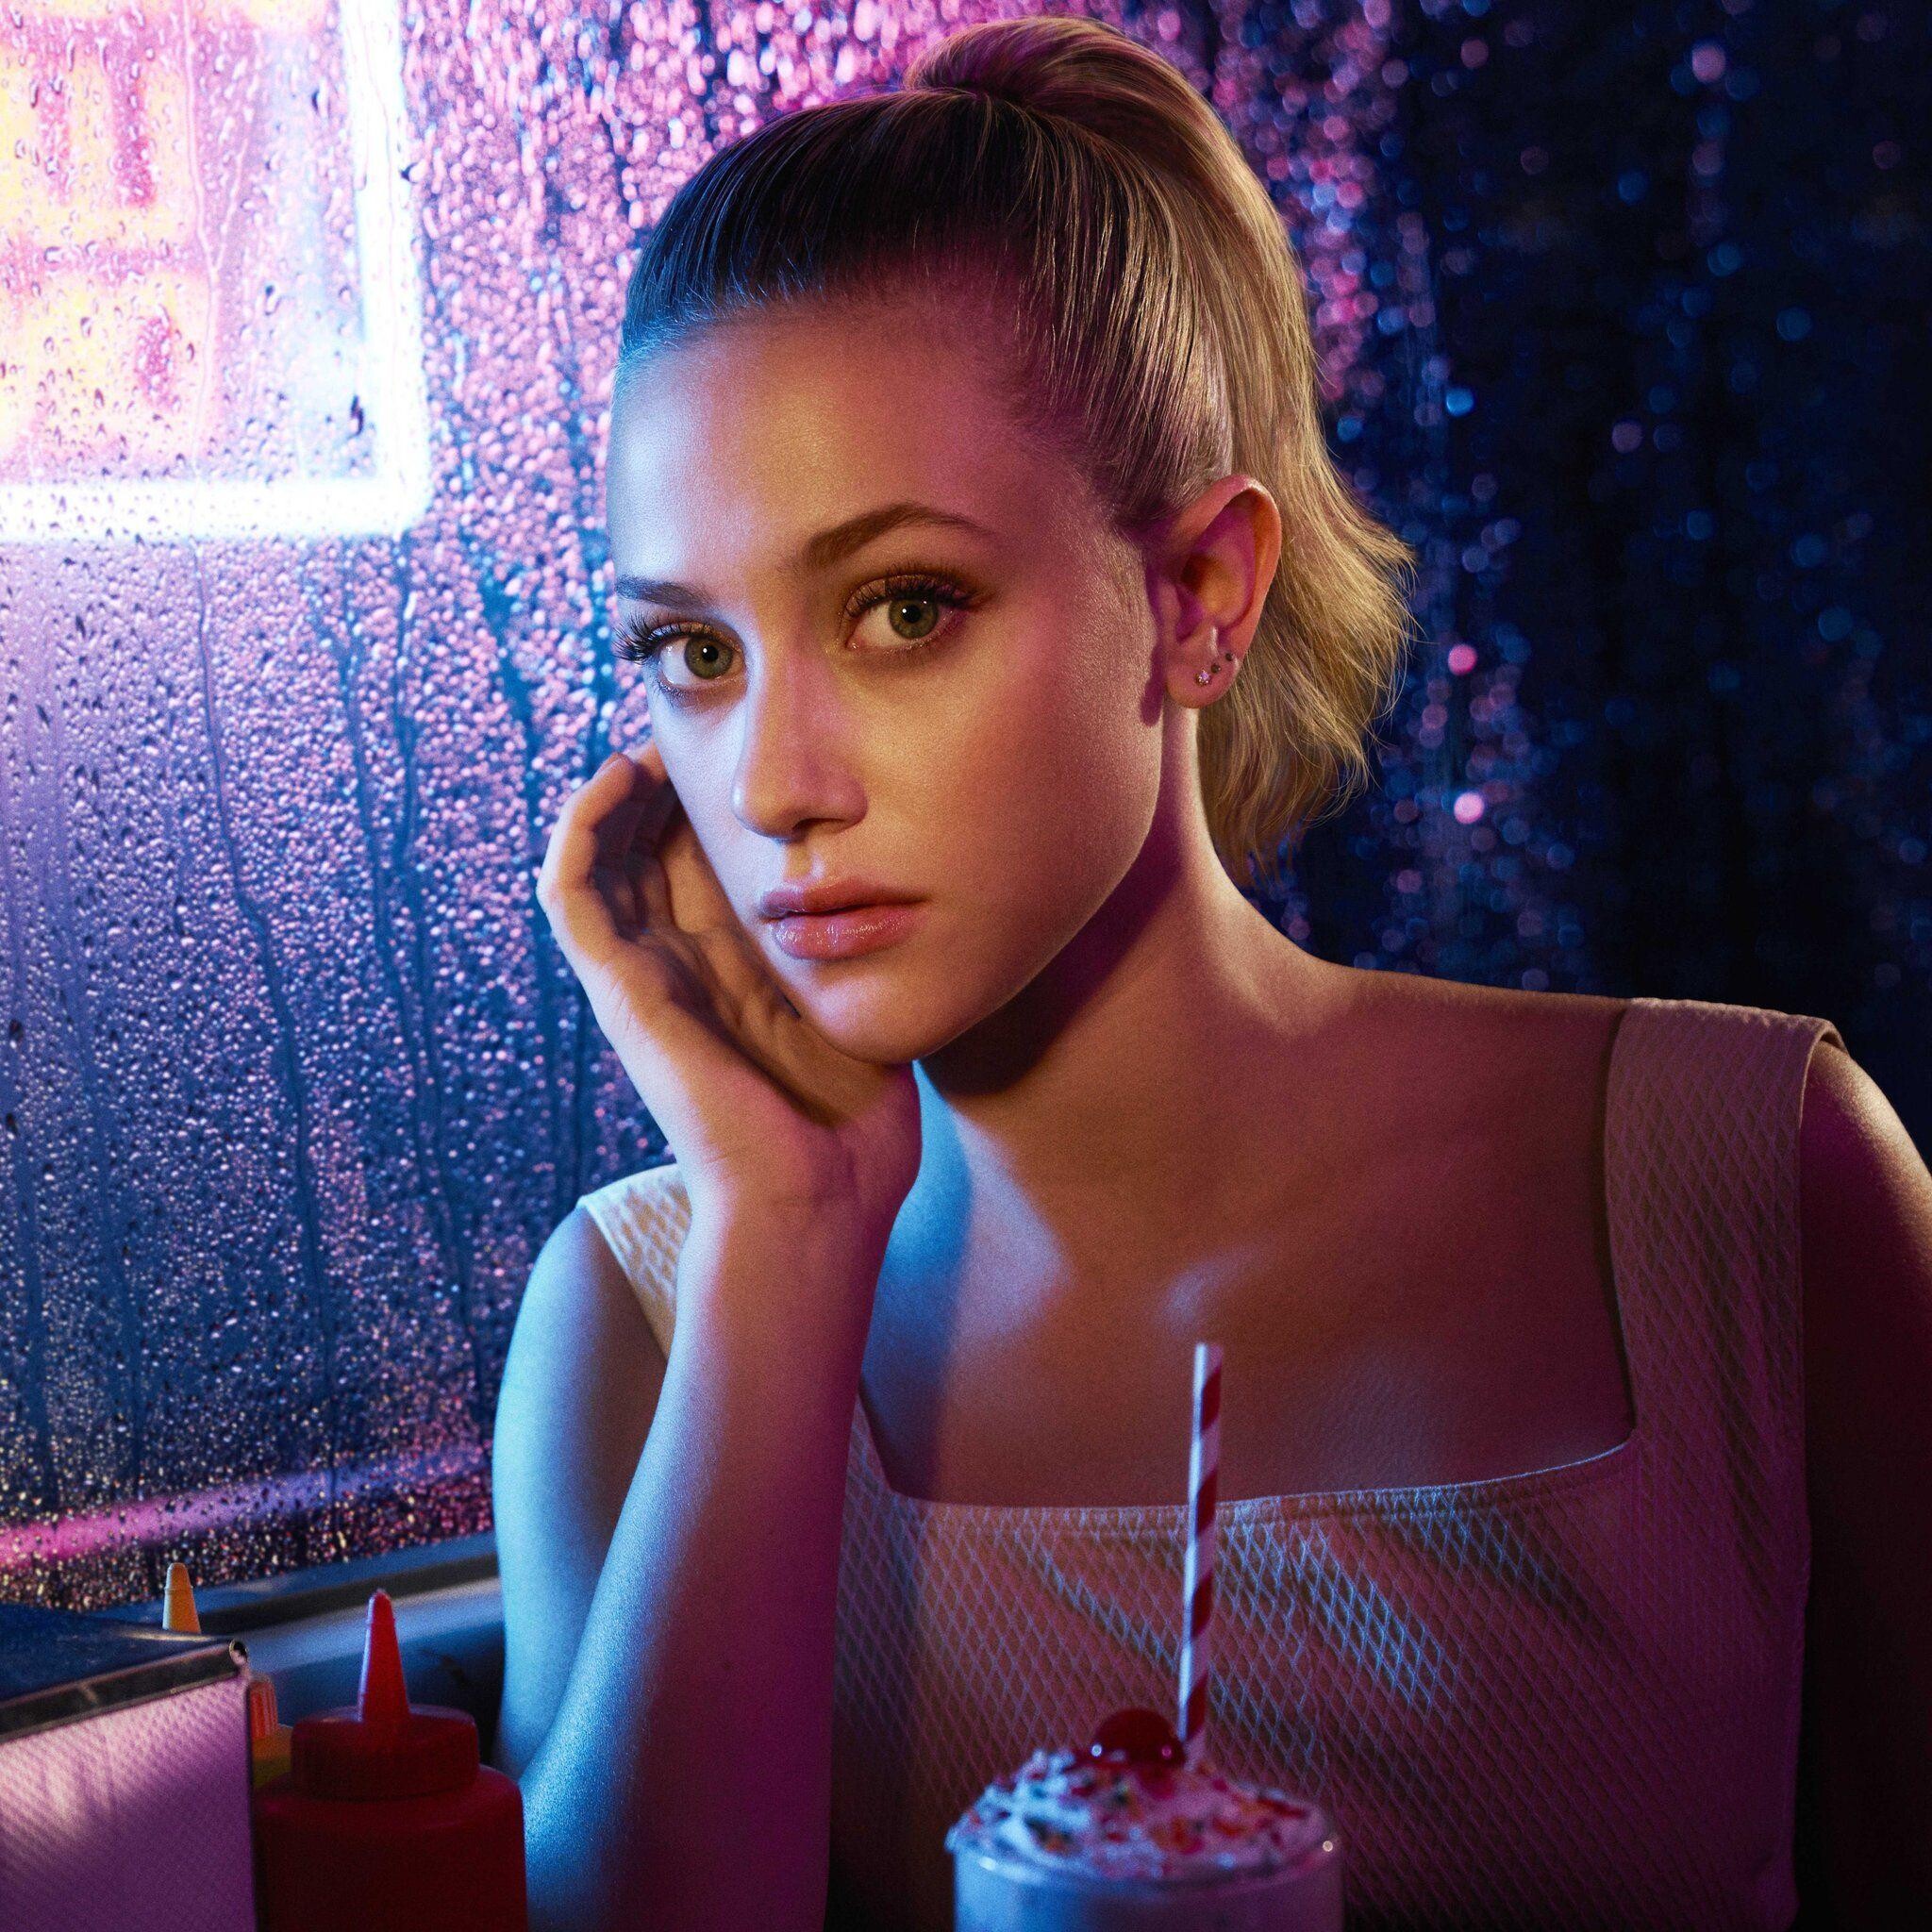 HD wallpaper, Iphone Hd Riverdale Tv Series Wallpaper Photo, 2050X2050 Hd Phone, Teenage Detective, Betty Cooper Wallpapers, Strong Female Lead, Riverdale Character